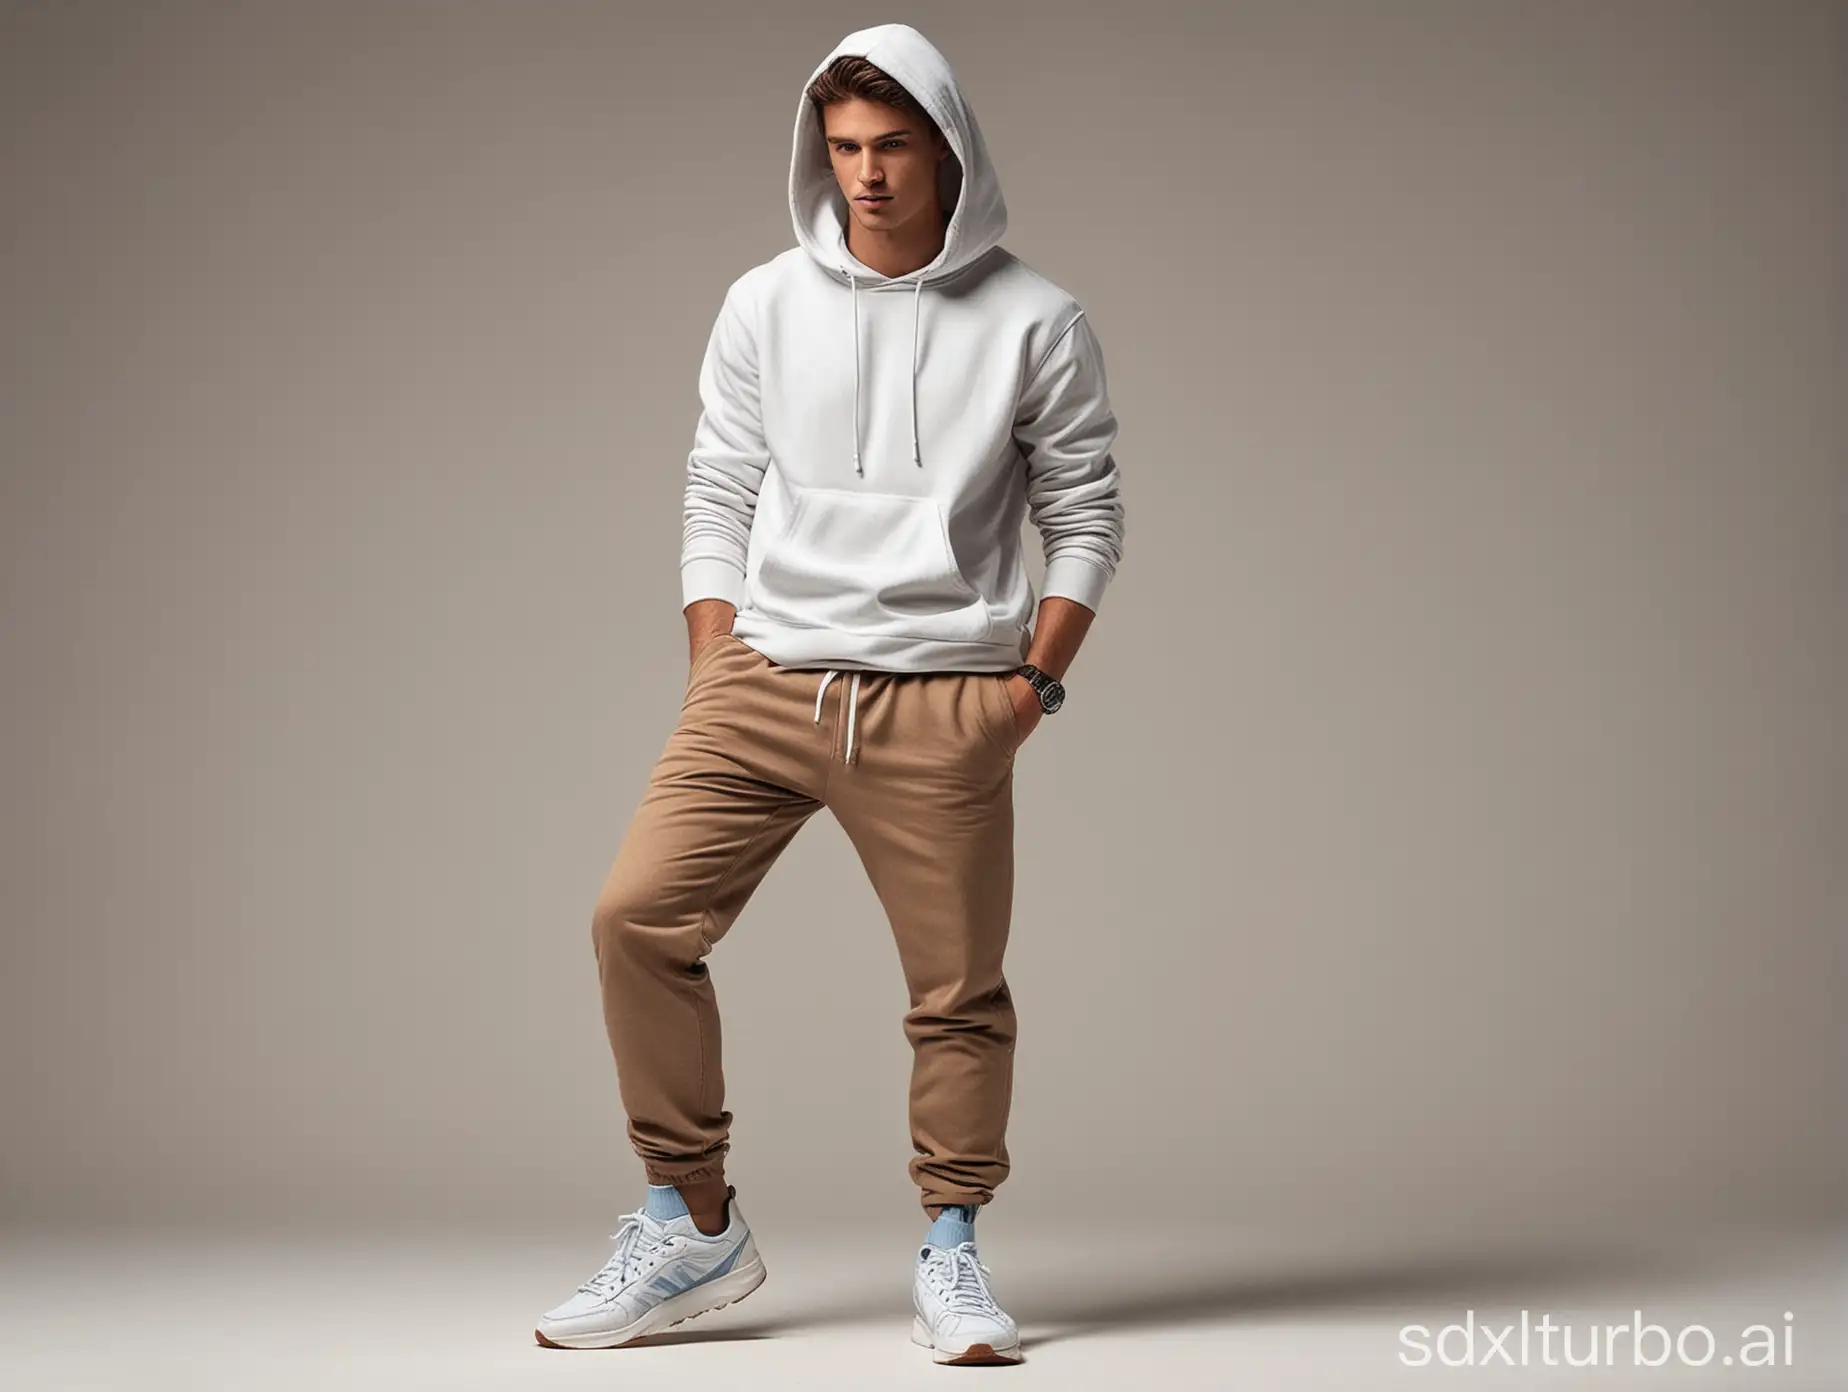 Create an image of a male model STENDING WITH TRENDY POSE, wearing a light WHITE HOODIE, light DARK BROWN pants, and light blue sneakers, against a RELETED background.